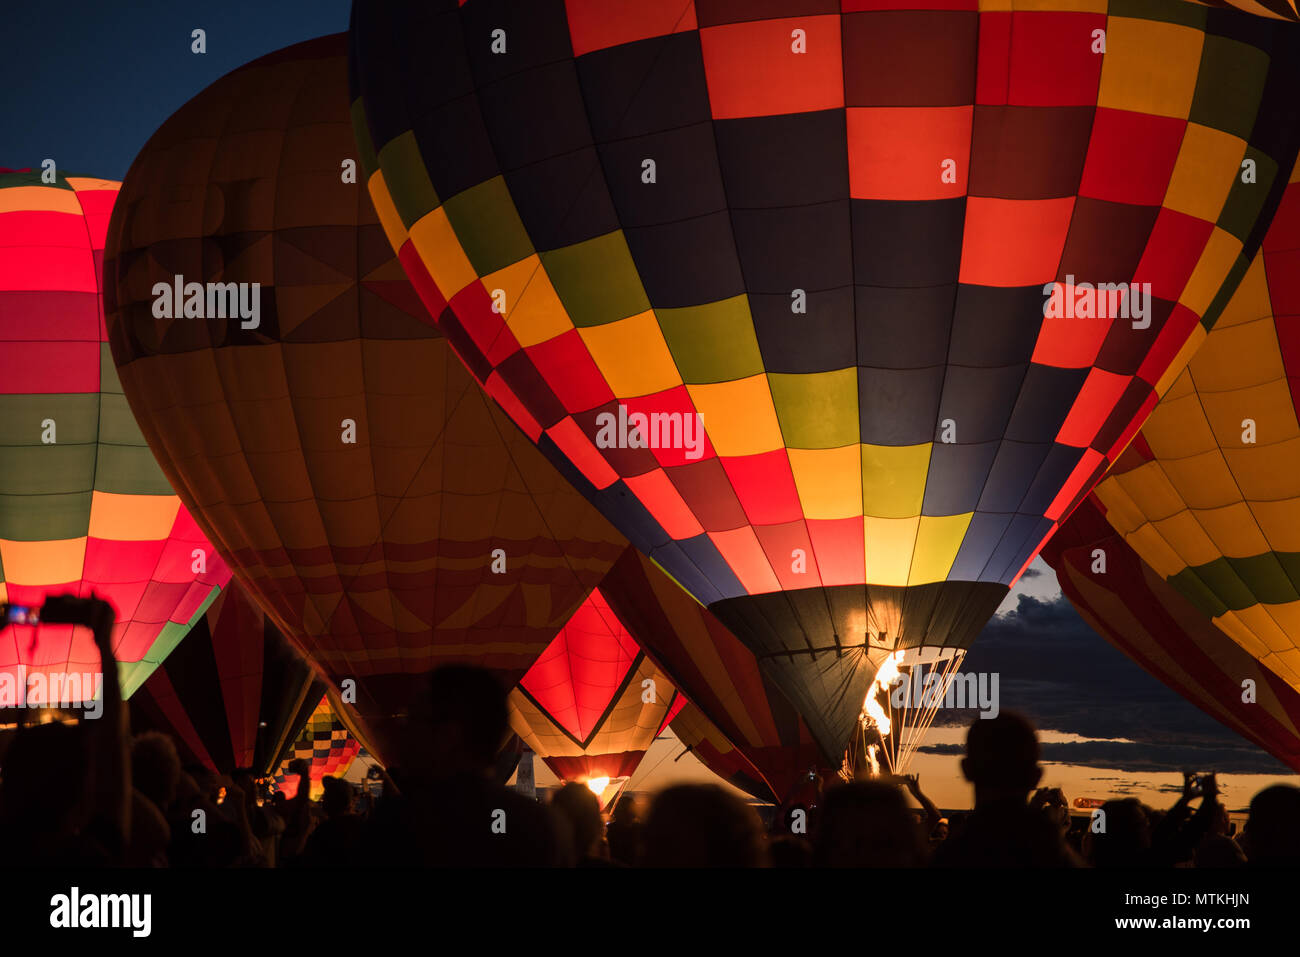 Colorful hot air balloons lit up in the night in Albuquerque, New Mexico. Stock Photo